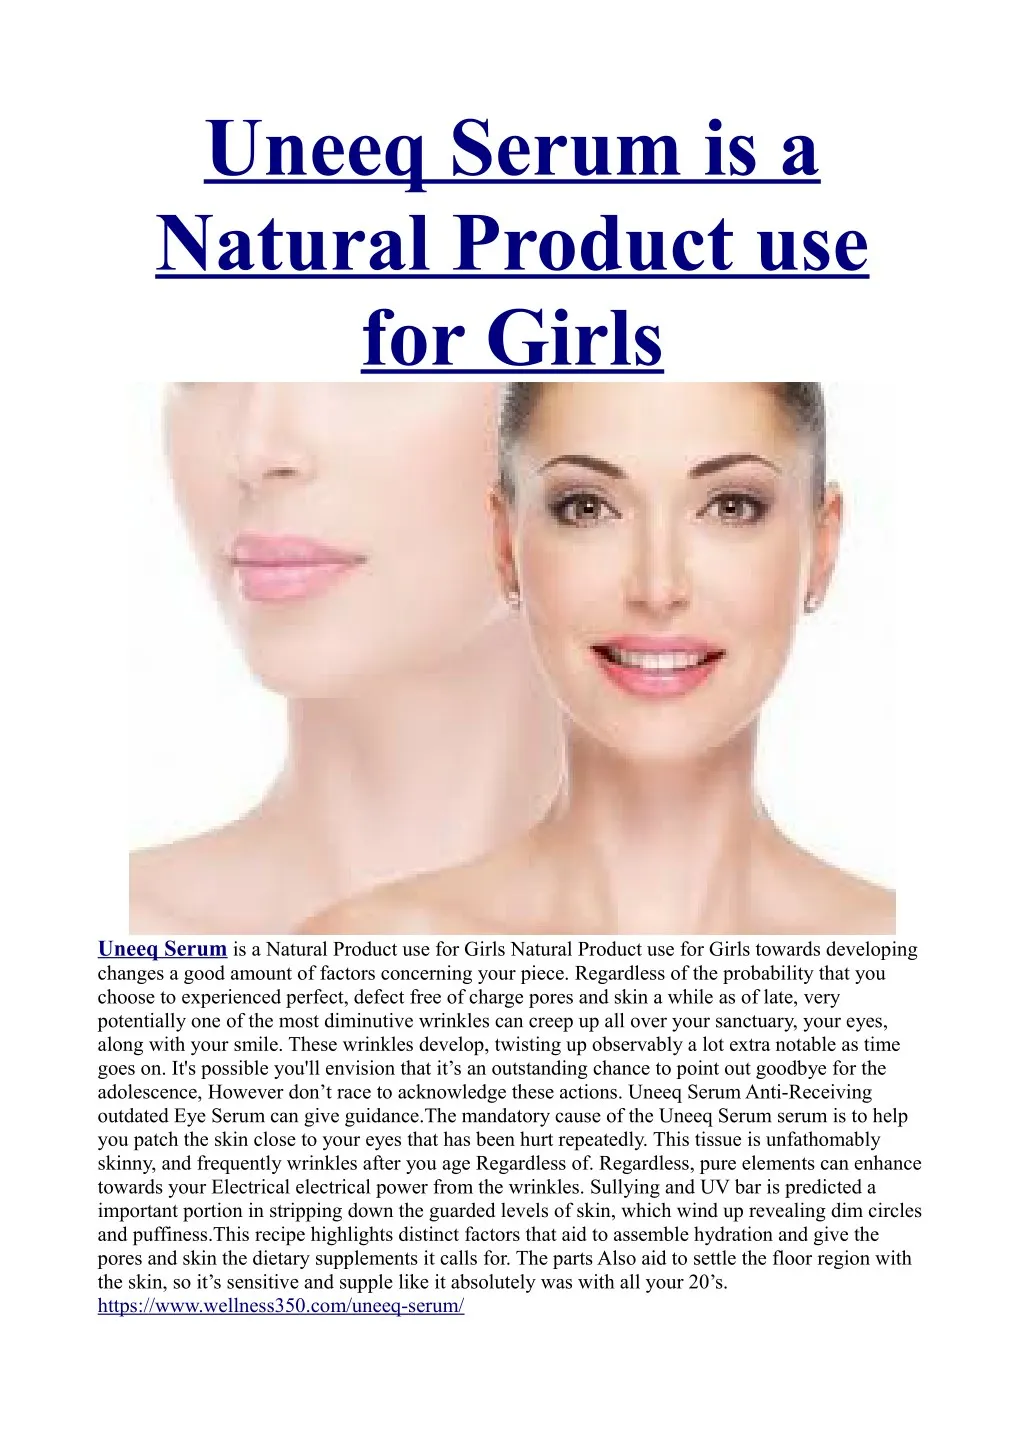 uneeq serum is a natural product use for girls